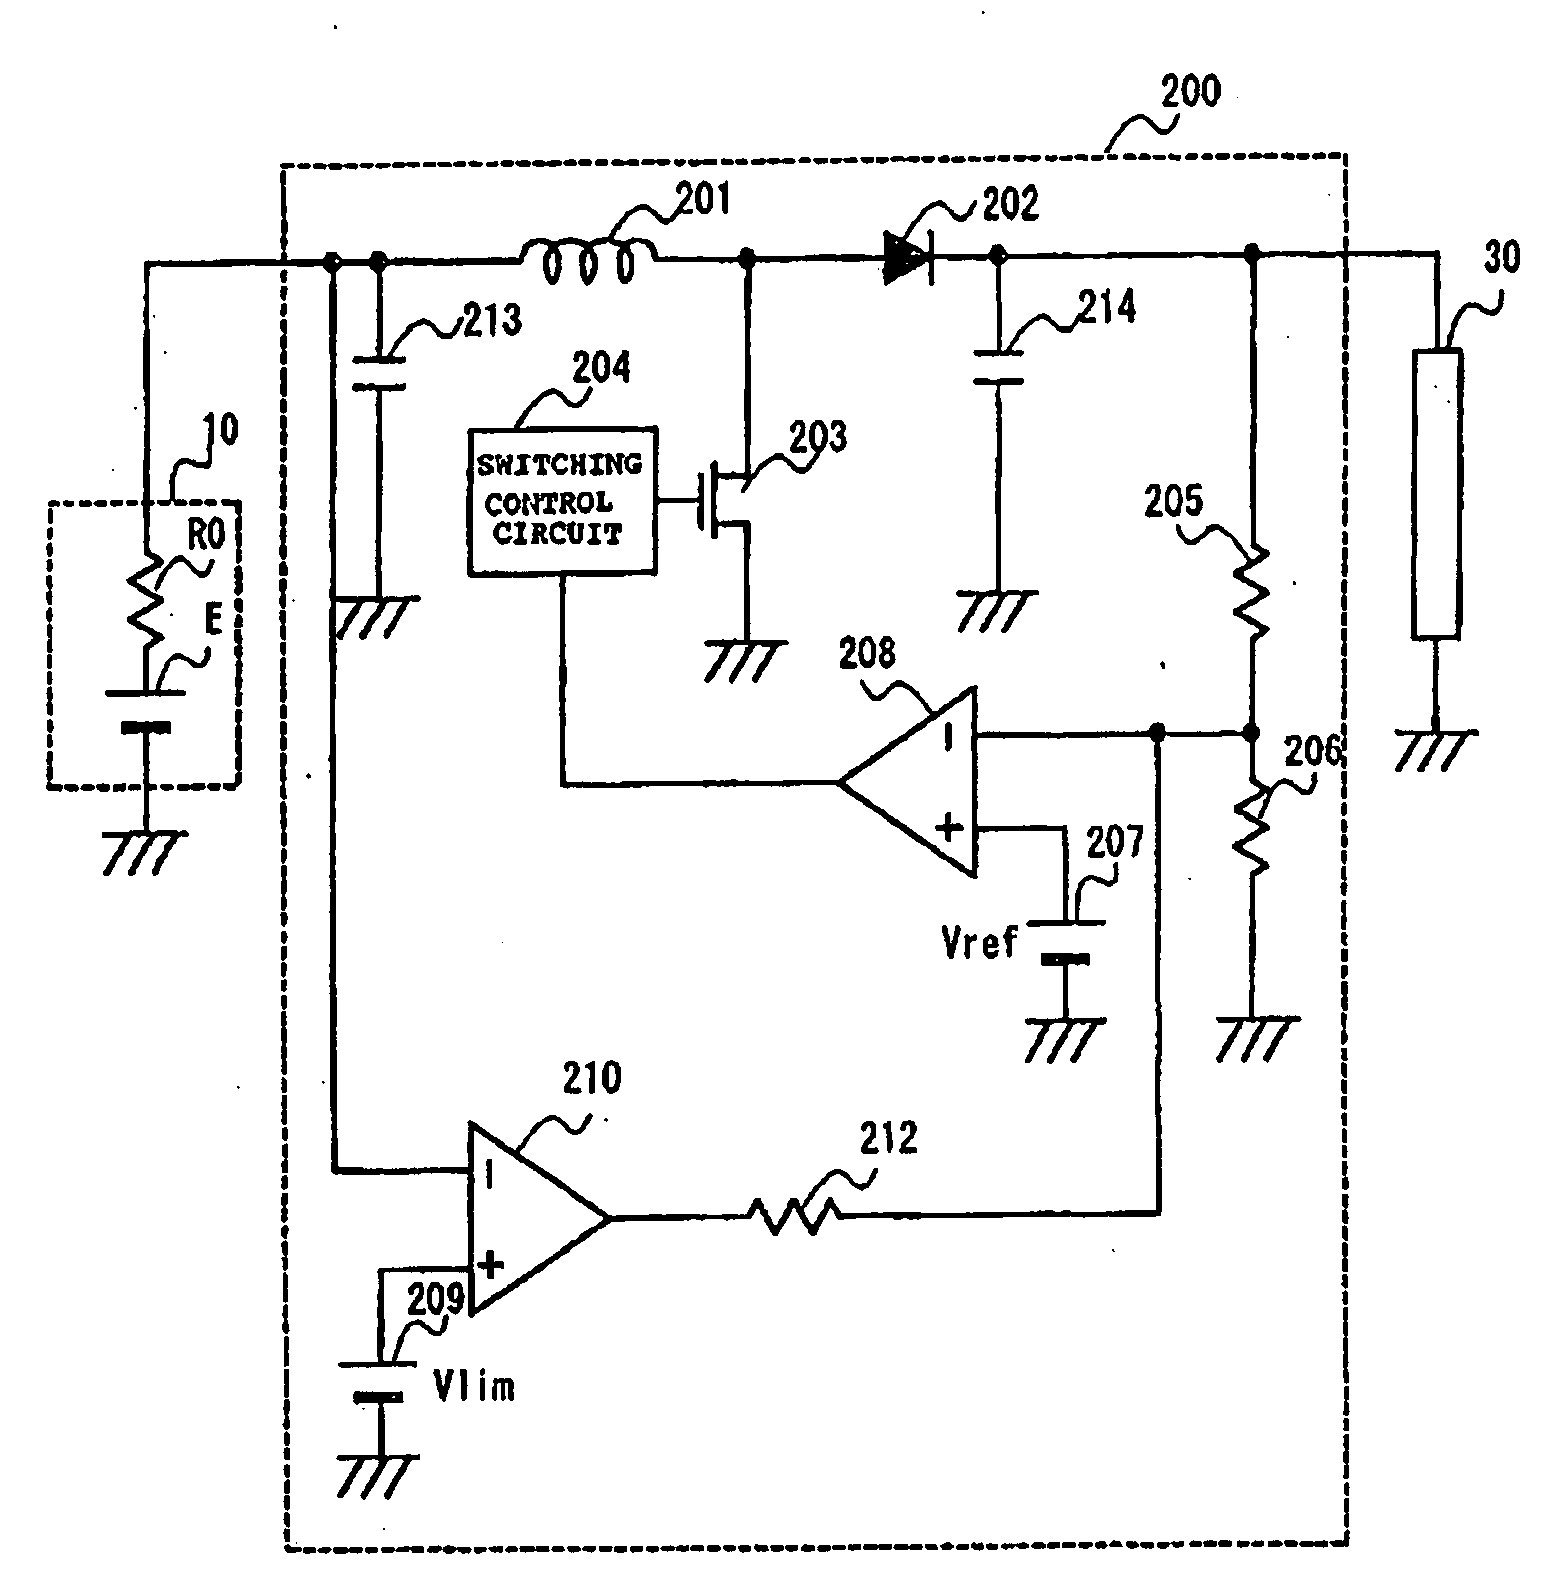 Output control device for electric power source